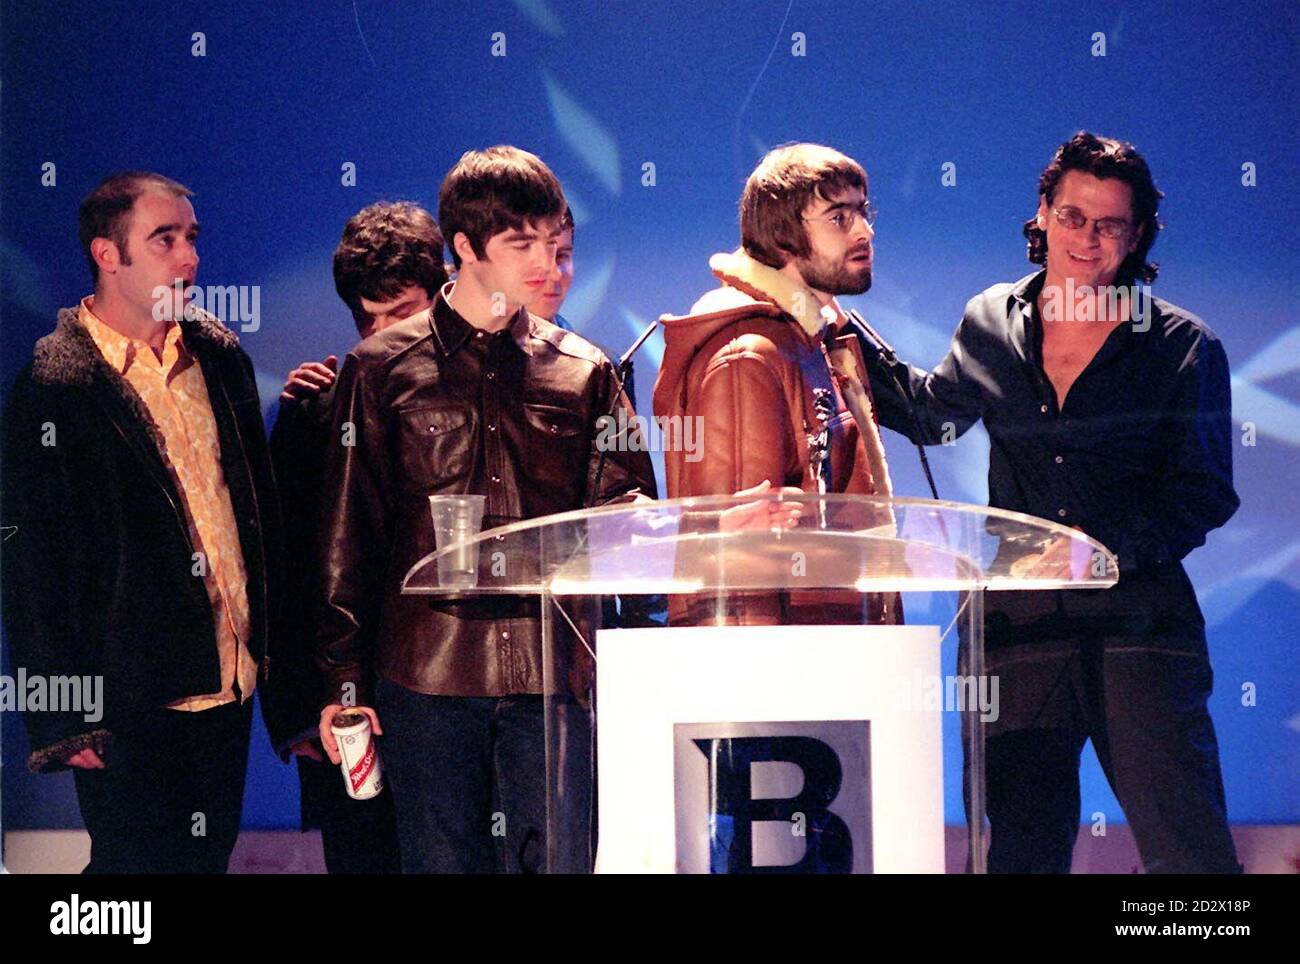 Manchester pop group Oasis accept the Brit award for Best Video (for 'Wonderwall') from Inxs frontman Michael Hutchence (left) at a star-studded ceremony at London's Earl's Court. Liam Gallagher, with beard, confronted Hutchence, once linked to Gallagher's present girlfriend Patsy Kensit, and said 'Has-beens shouldn't present awards to going-t-be's'. Stock Photo